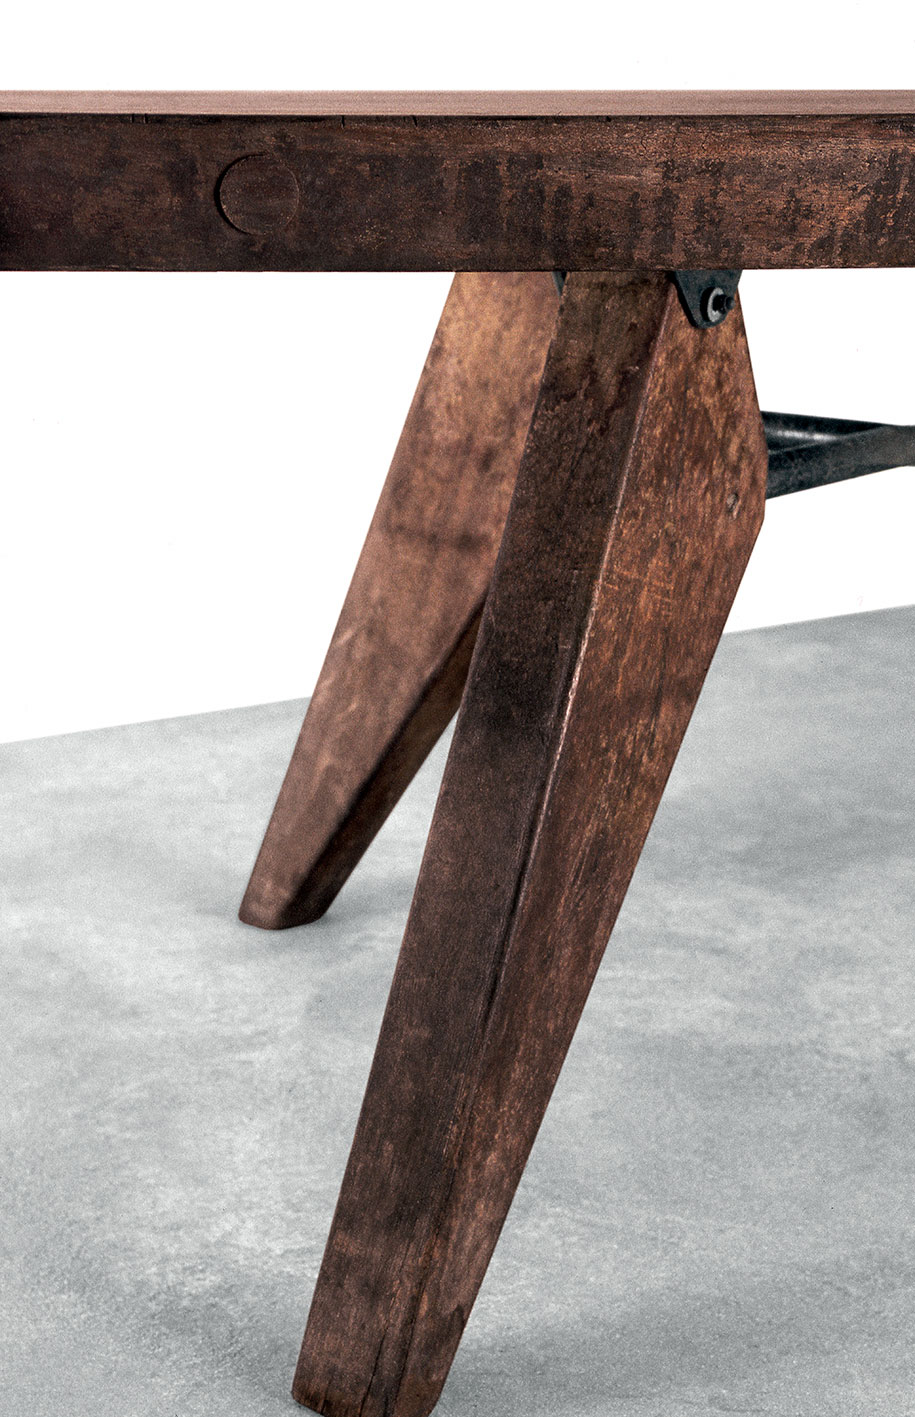 S.A.M. table, variant. Adapted by Charlotte Perriand for the Air France building, Brazzaville, 1952. Table-top and base of solid African kambala wood.